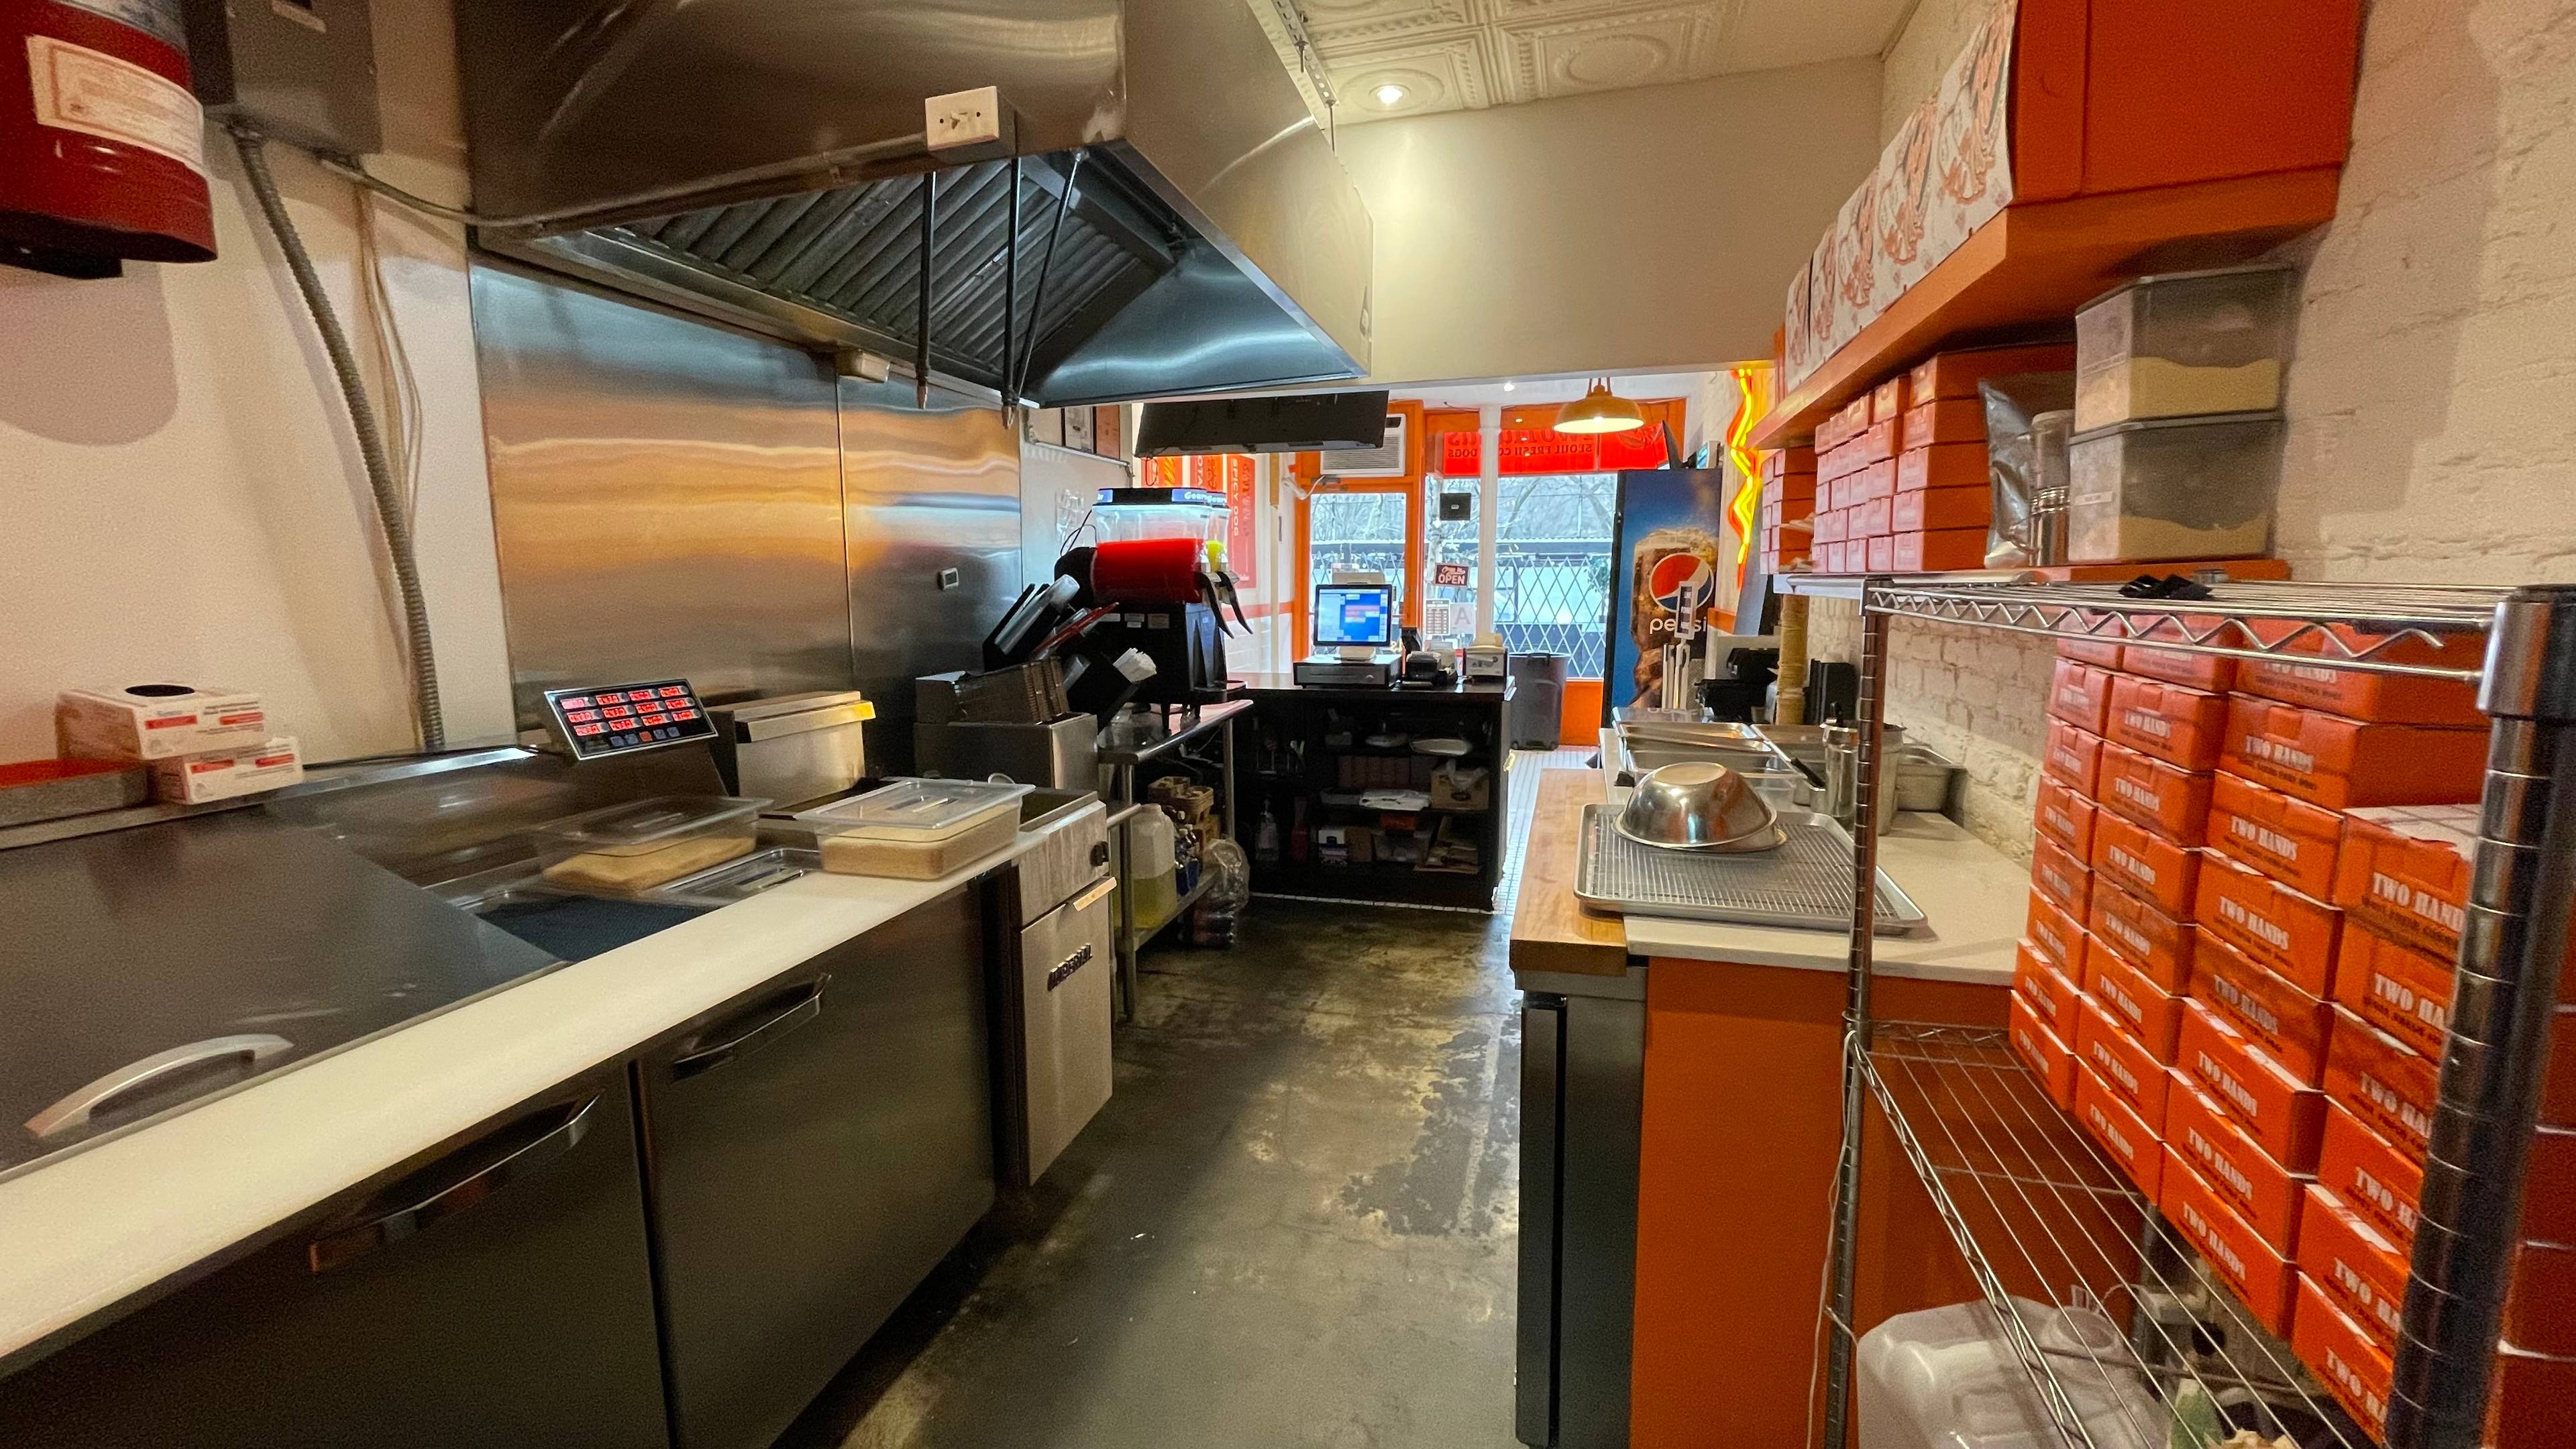 Prime COMMERCIAL Location for Fast Food Restaurant located in Alphabet City!